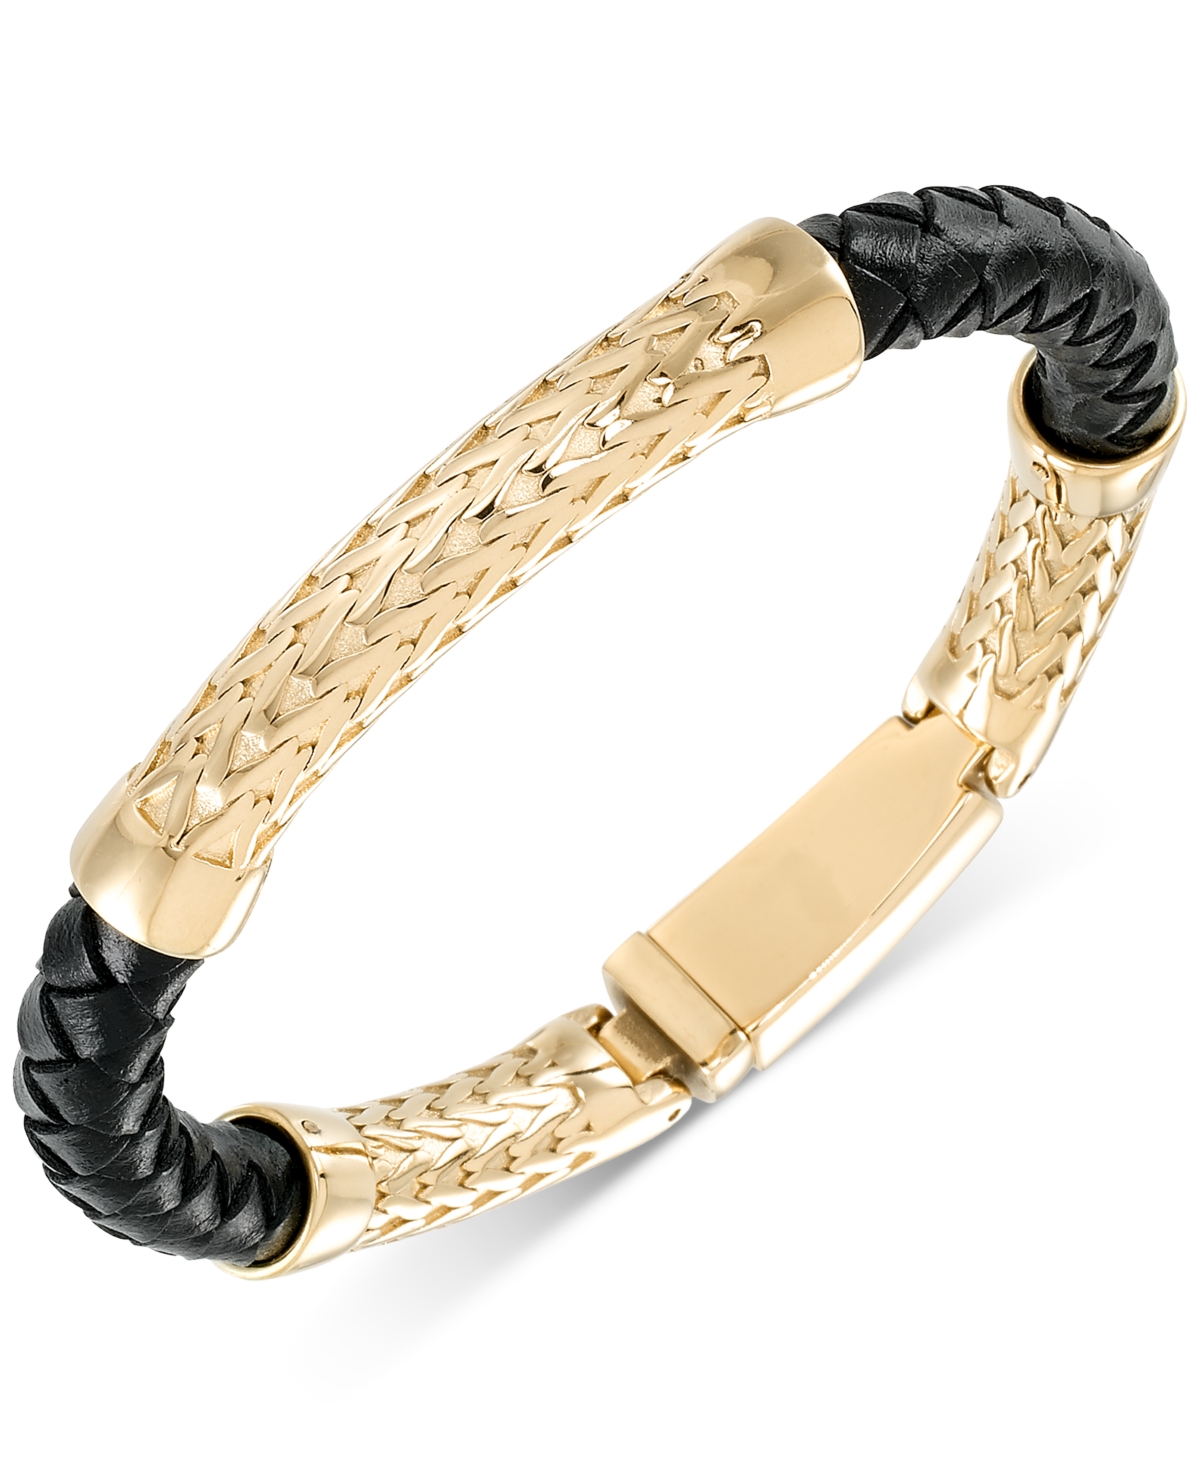 Shop Legacy For Men By Simone I. Smith Black Leather Bracelet In Stainless Steel In Gold-tone